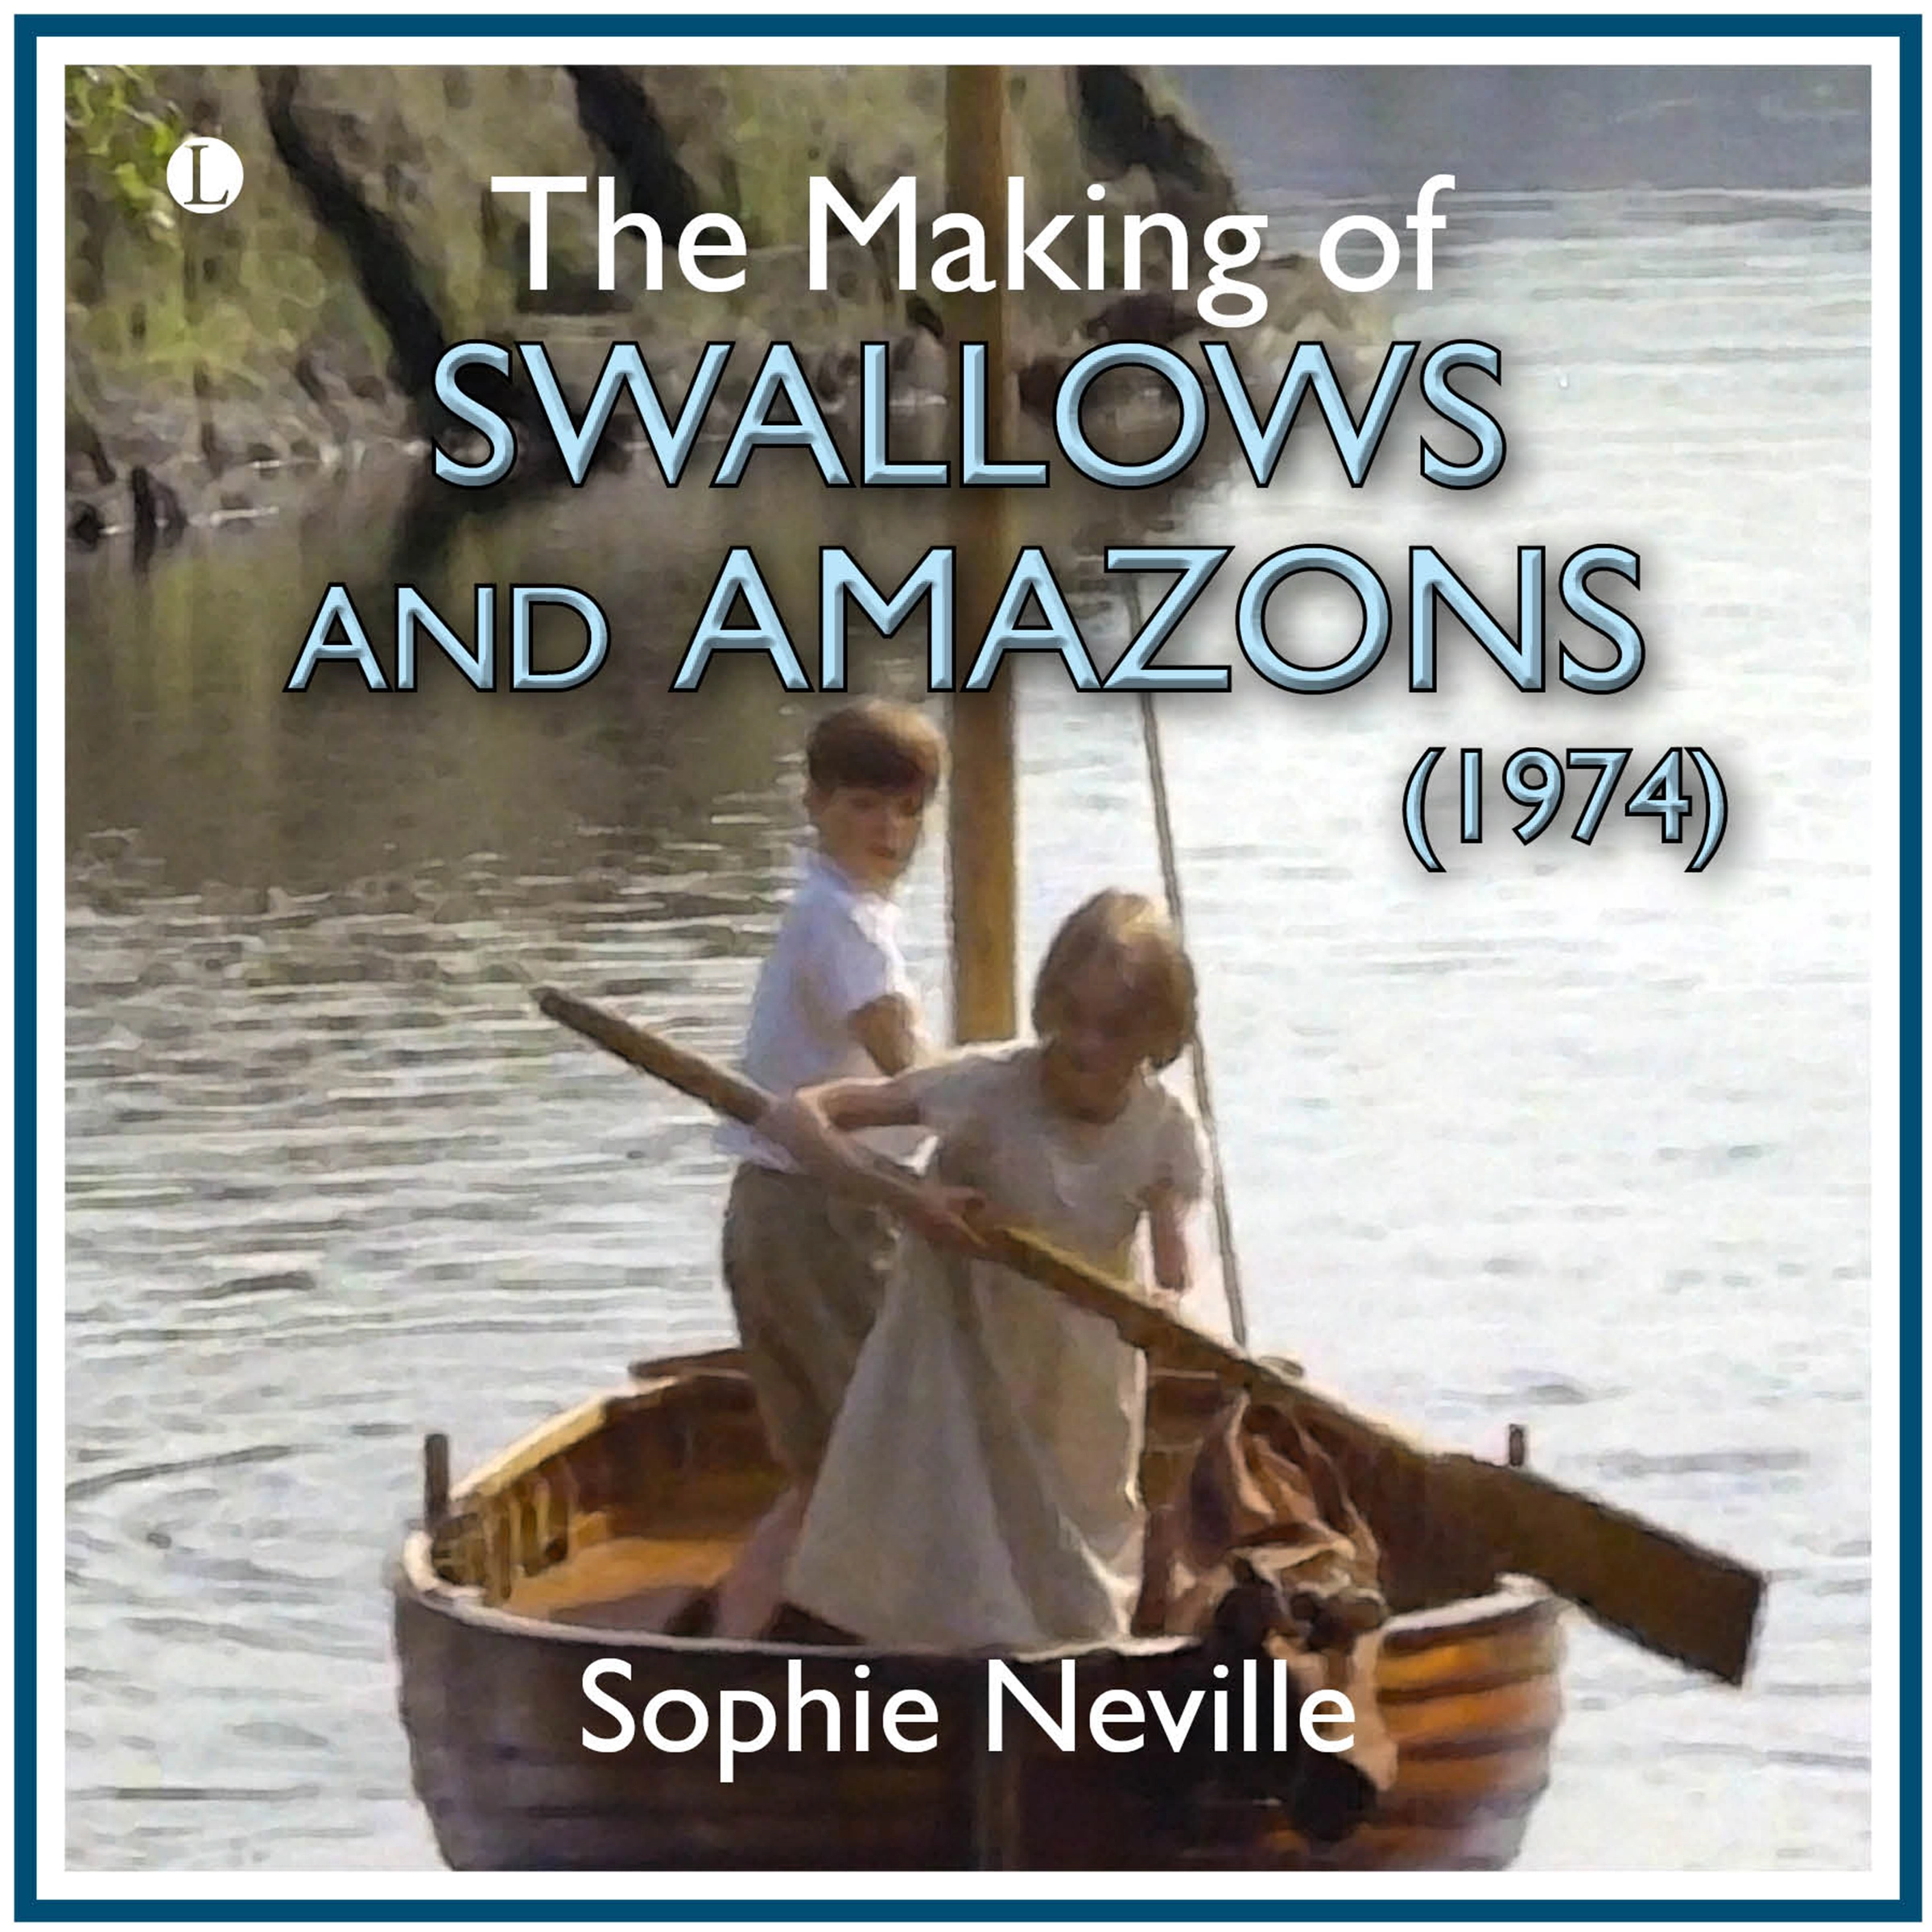 The Making of Swallows and Amazons (1974) by Sophie Neville Audiobook